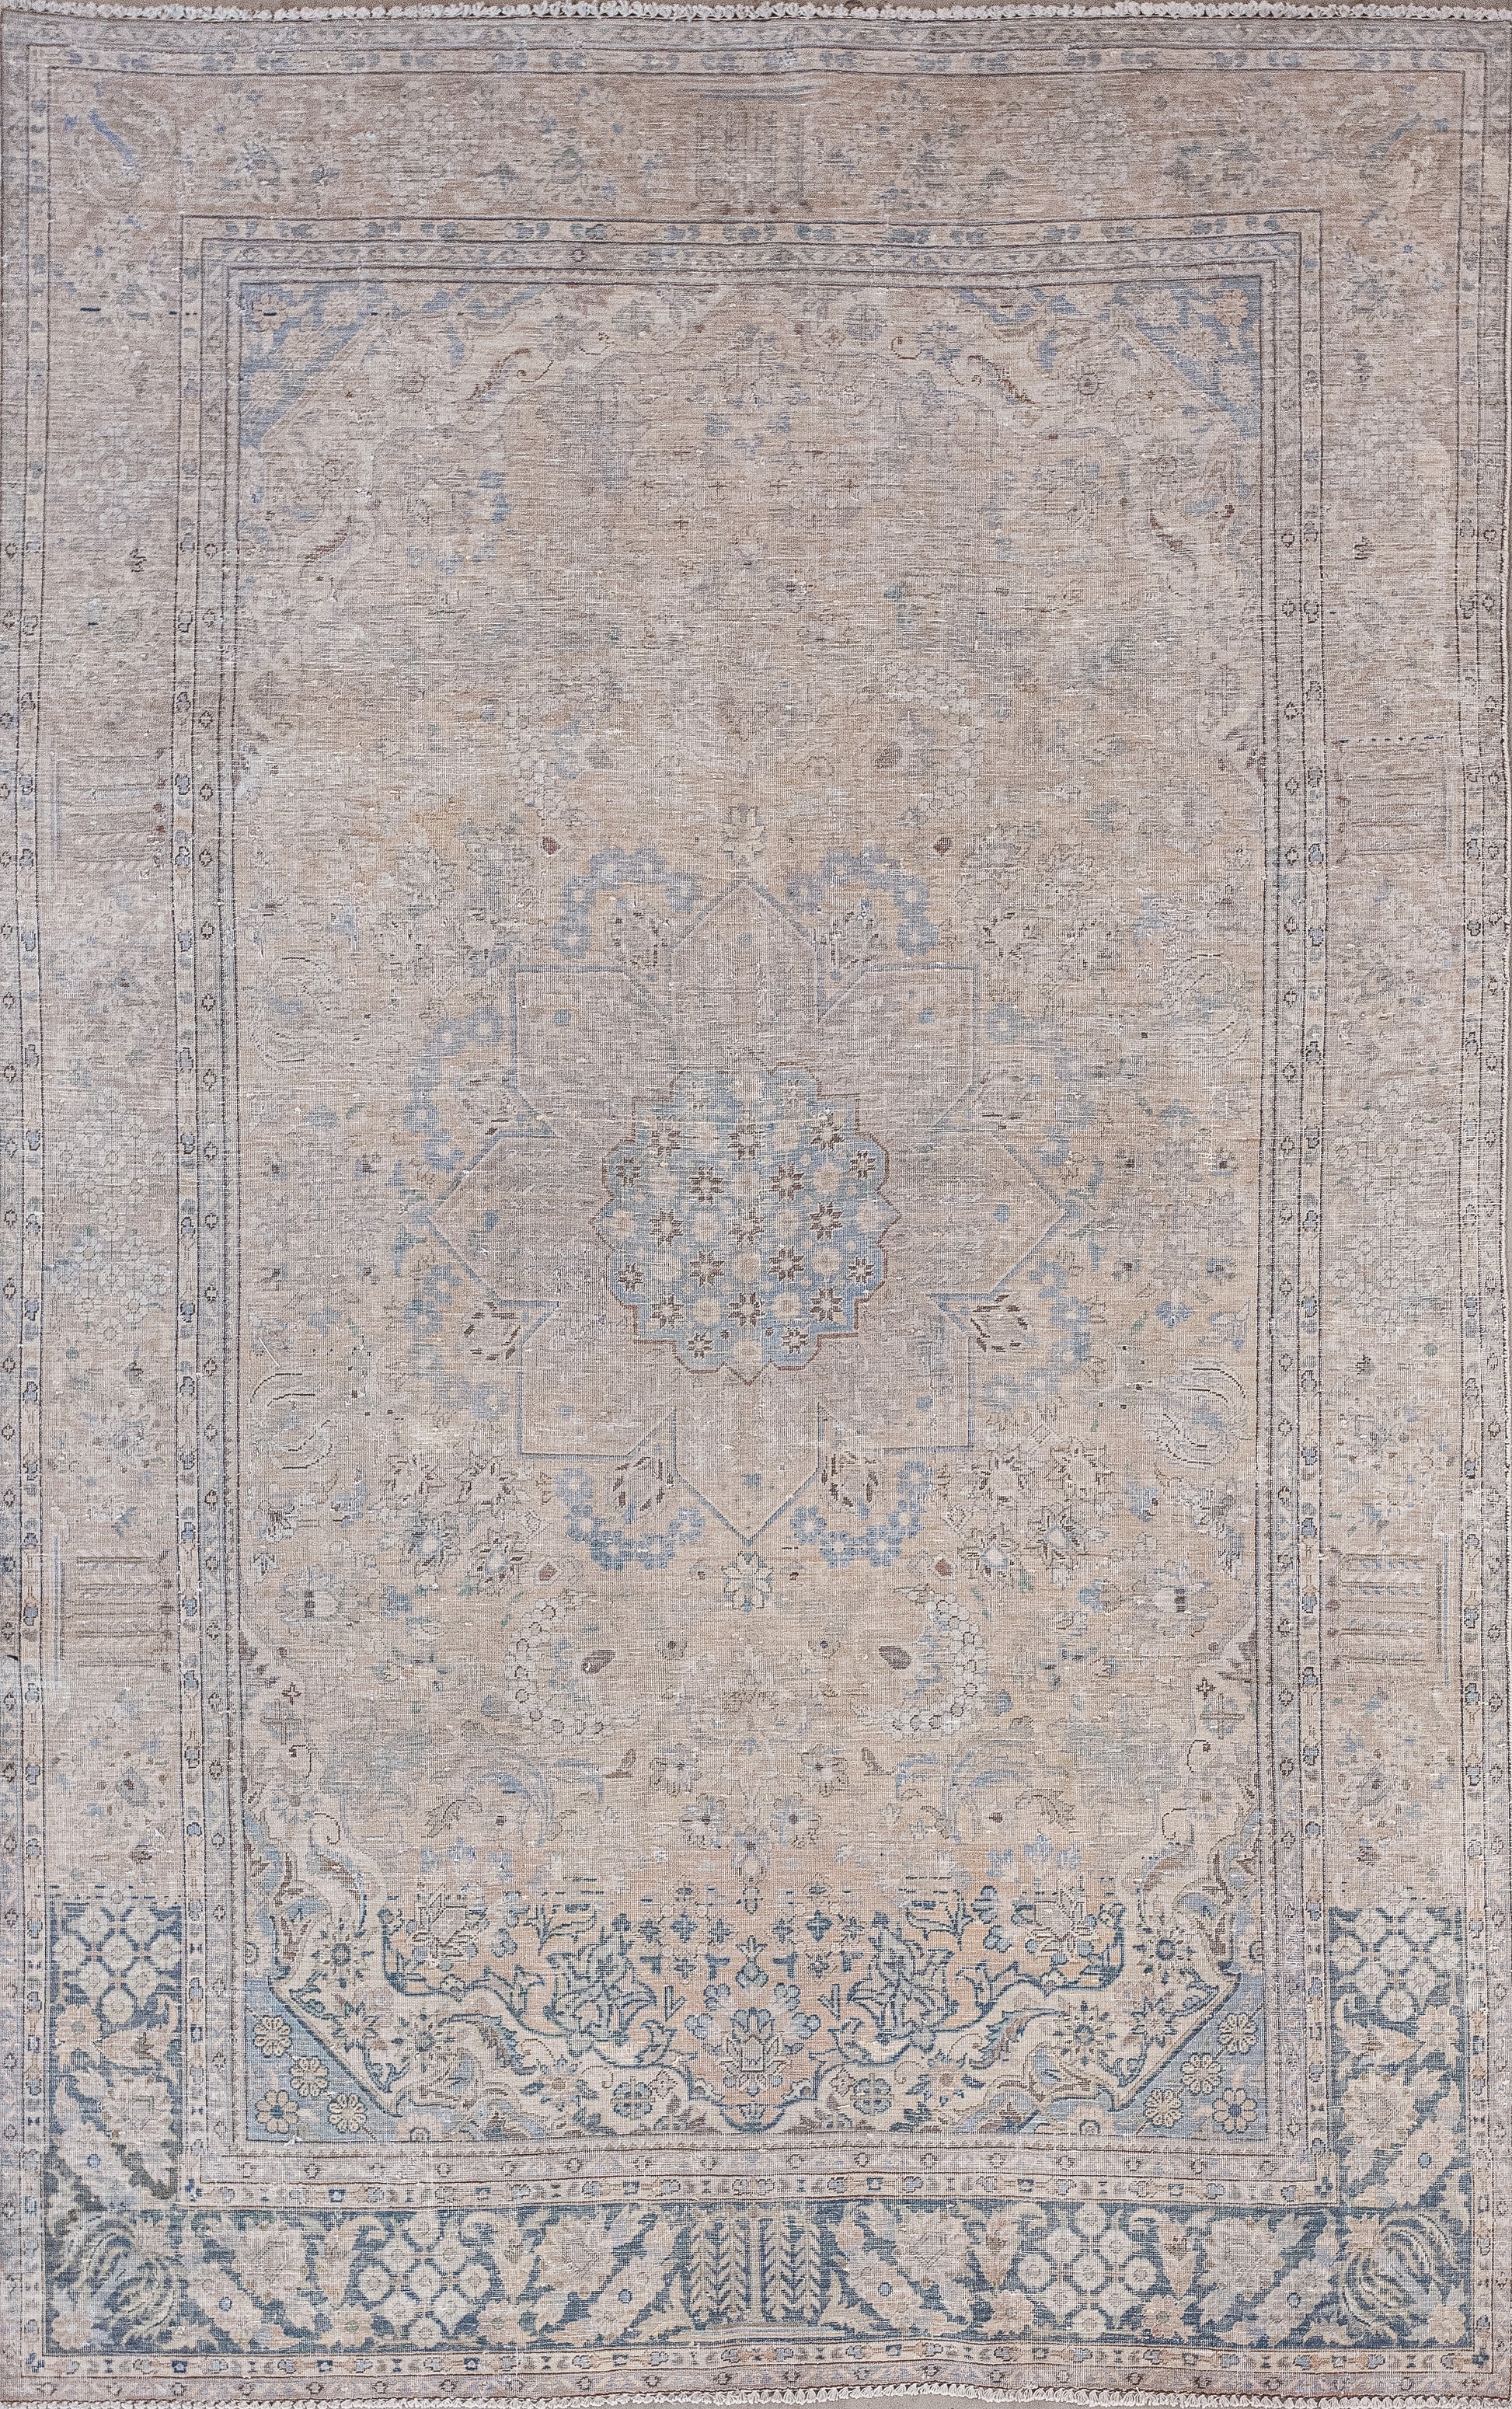 This jewel in the form of a rug was woven with the inspiration of one of the world's great religions, Buddhism. The illuminating color scheme has a latte for the background, cloud blue for the pattern, and black for the outlines.